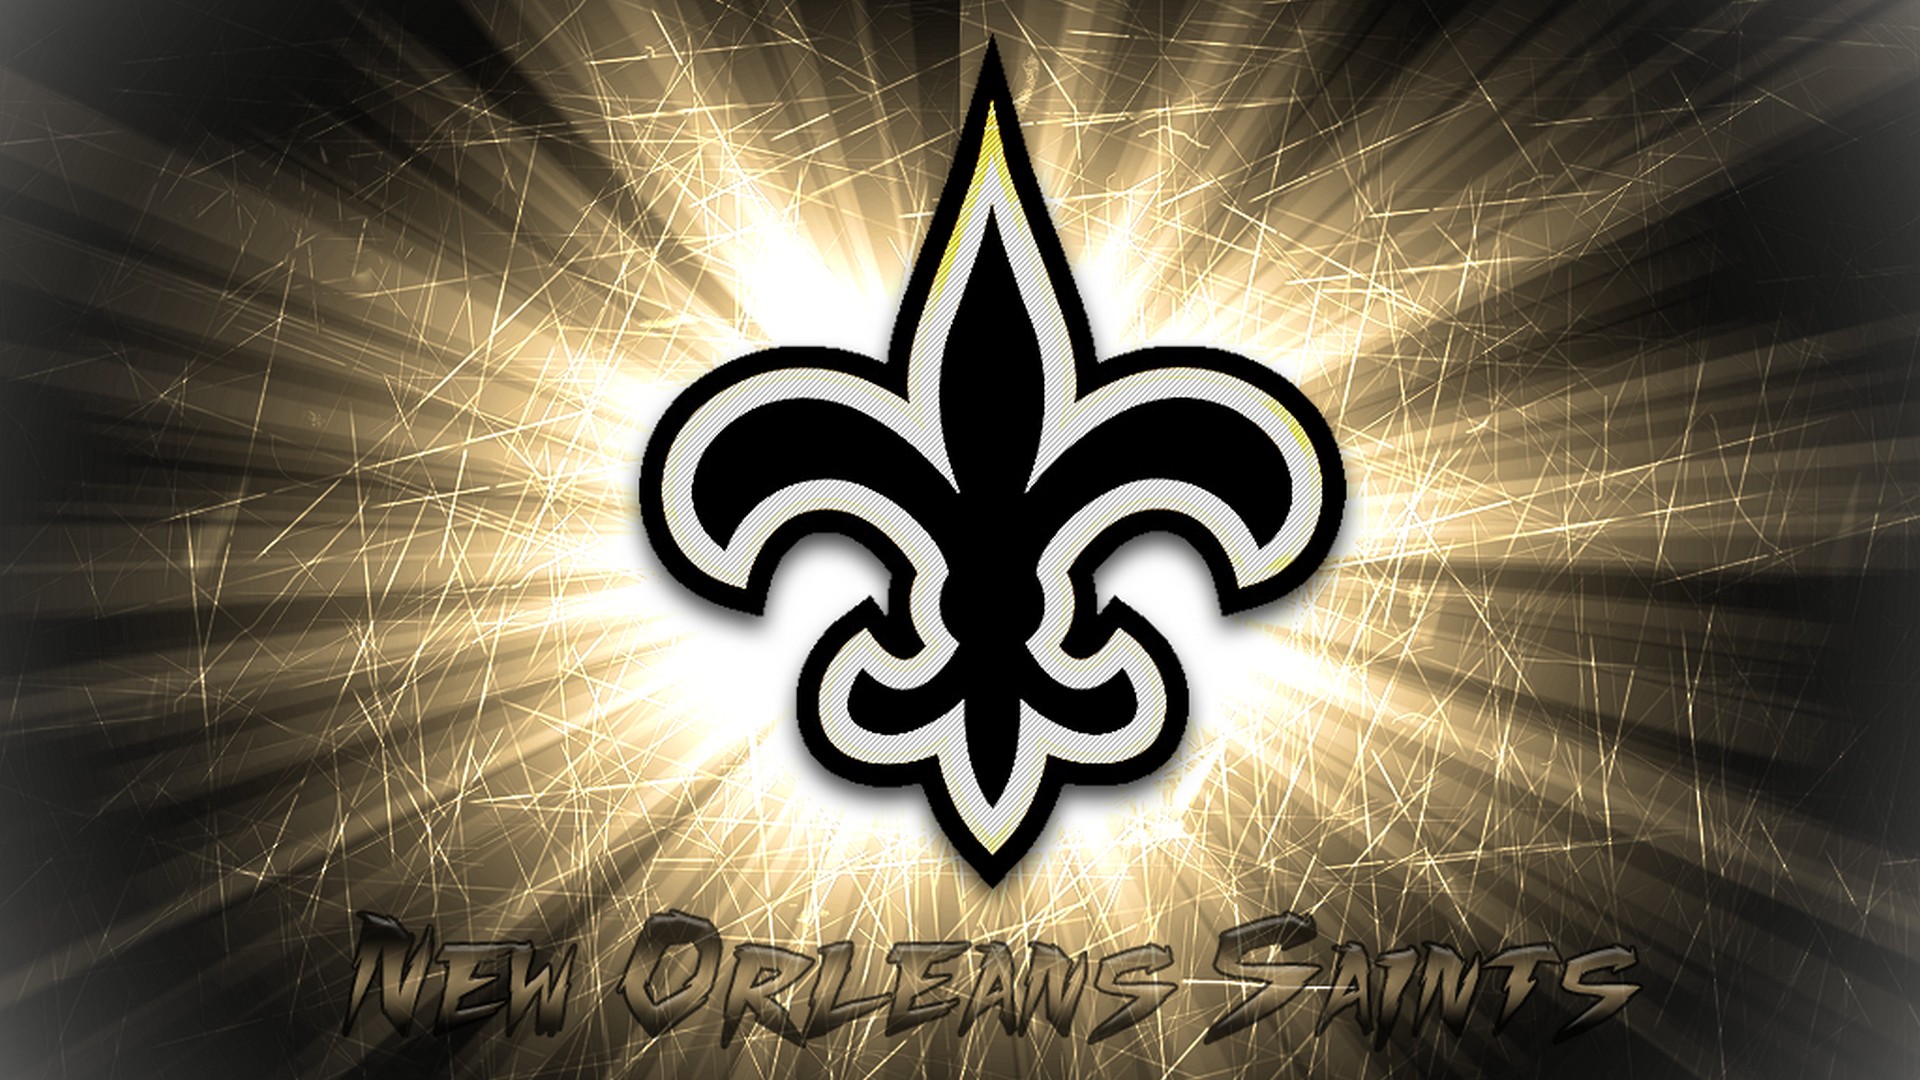 New Orleans Saints NFL HD Wallpapers With Resolution 1920X1080 pixel. You can make this wallpaper for your Mac or Windows Desktop Background, iPhone, Android or Tablet and another Smartphone device for free